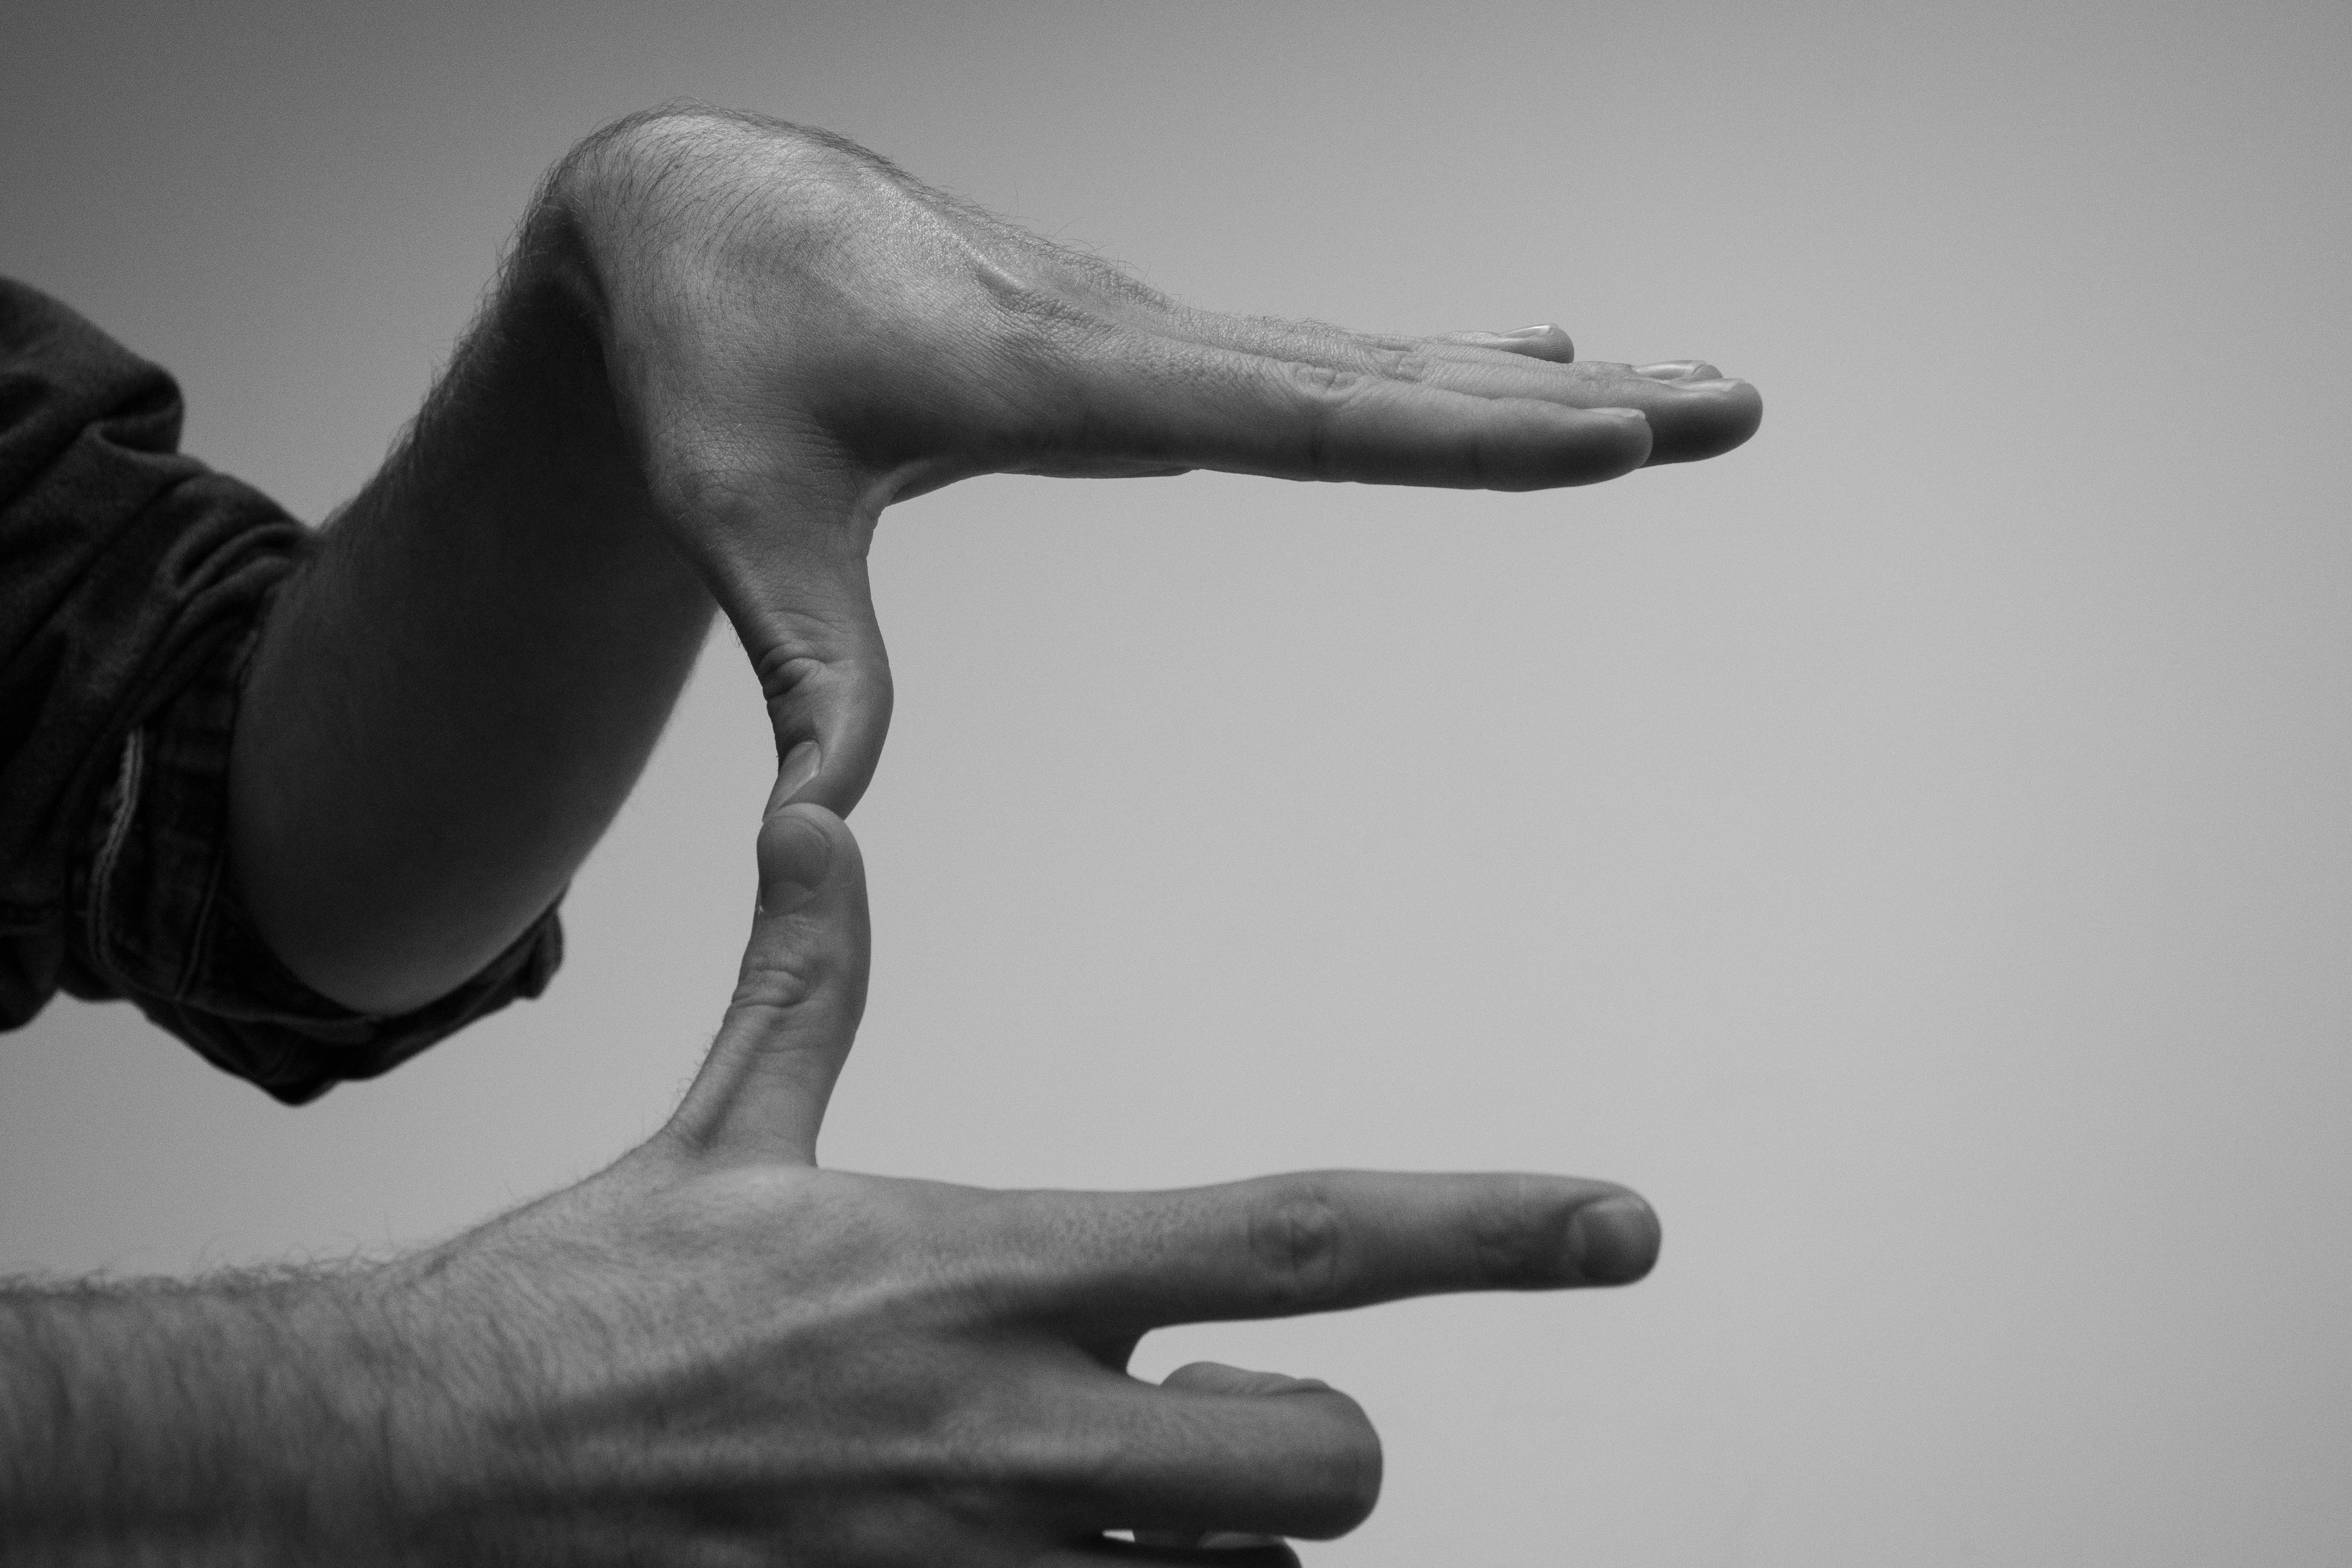 Stock photo in black and white of a pair of hands making a rectangular shape